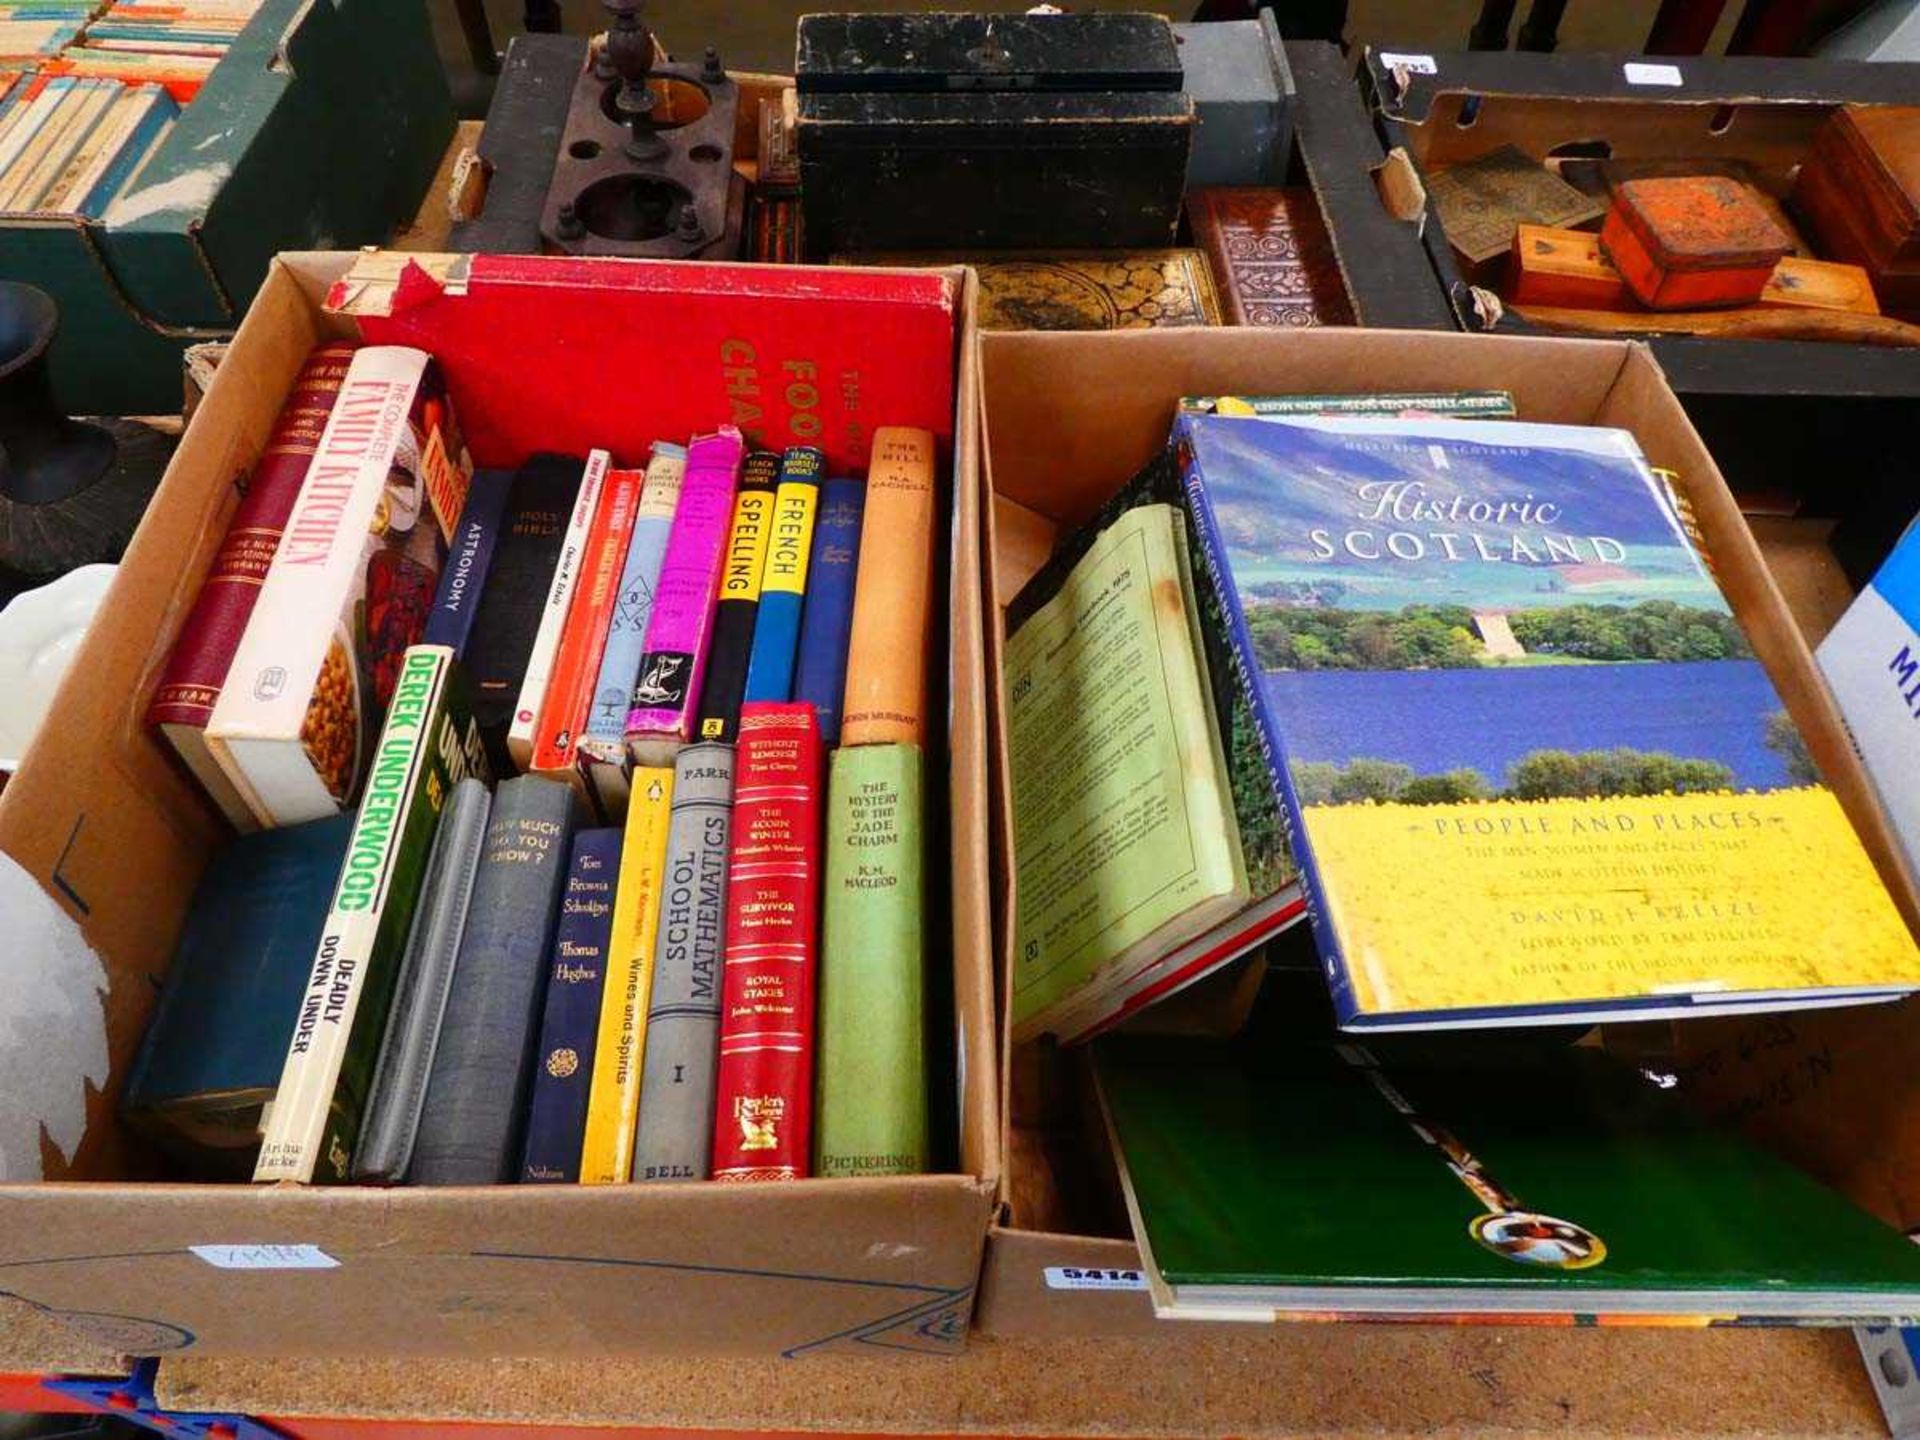 2 boxes containing travel and painting guides plus cookery books and novels